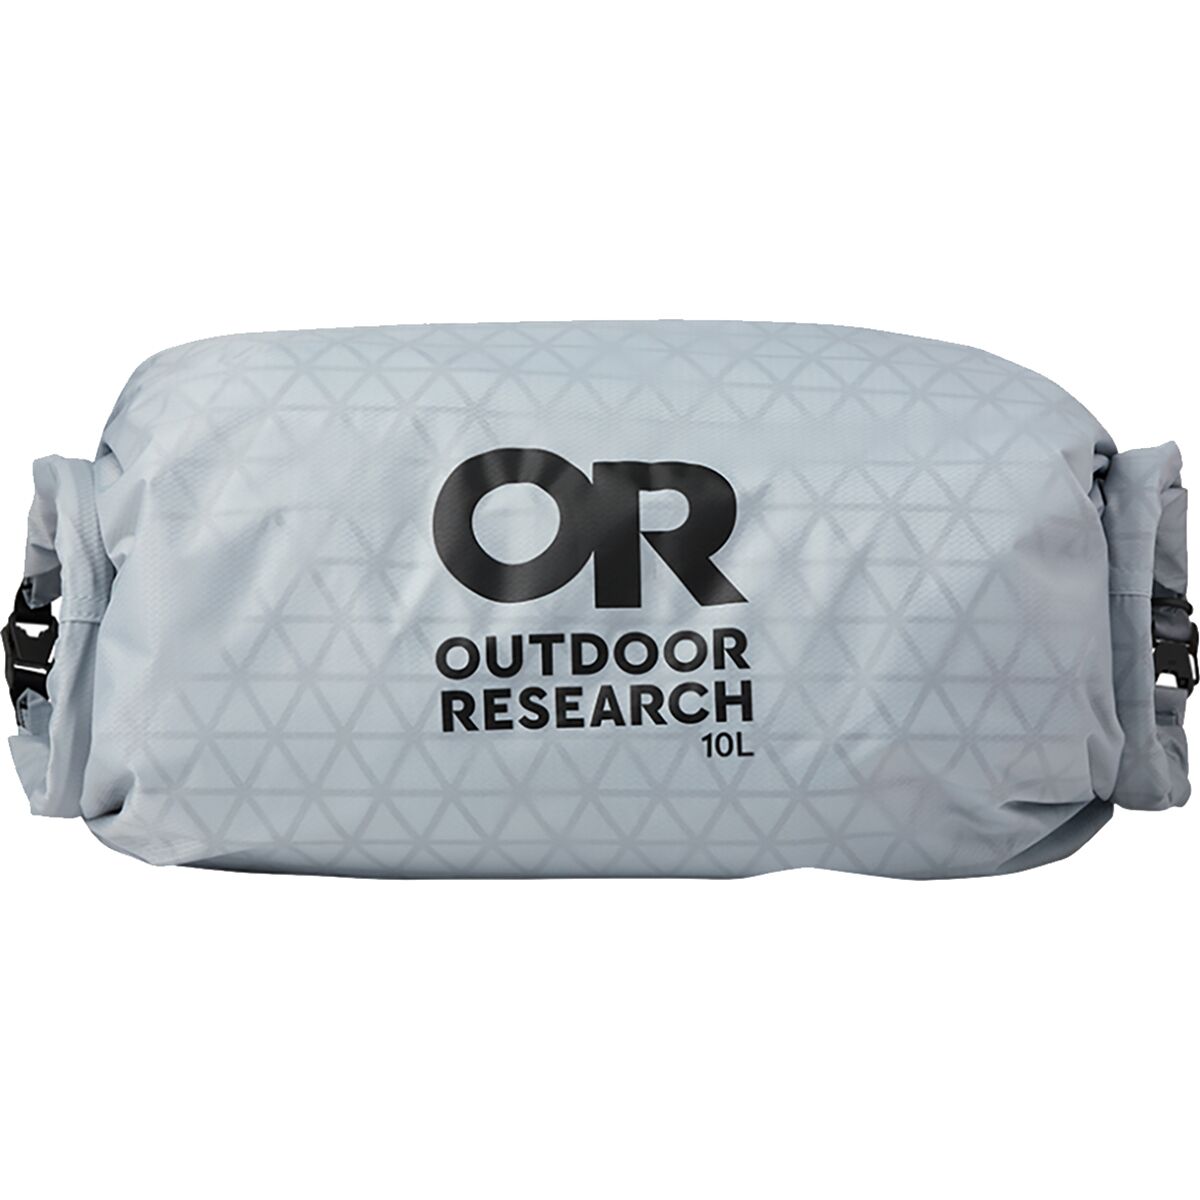 Outdoor Research Dirty/Clean 10L Bag